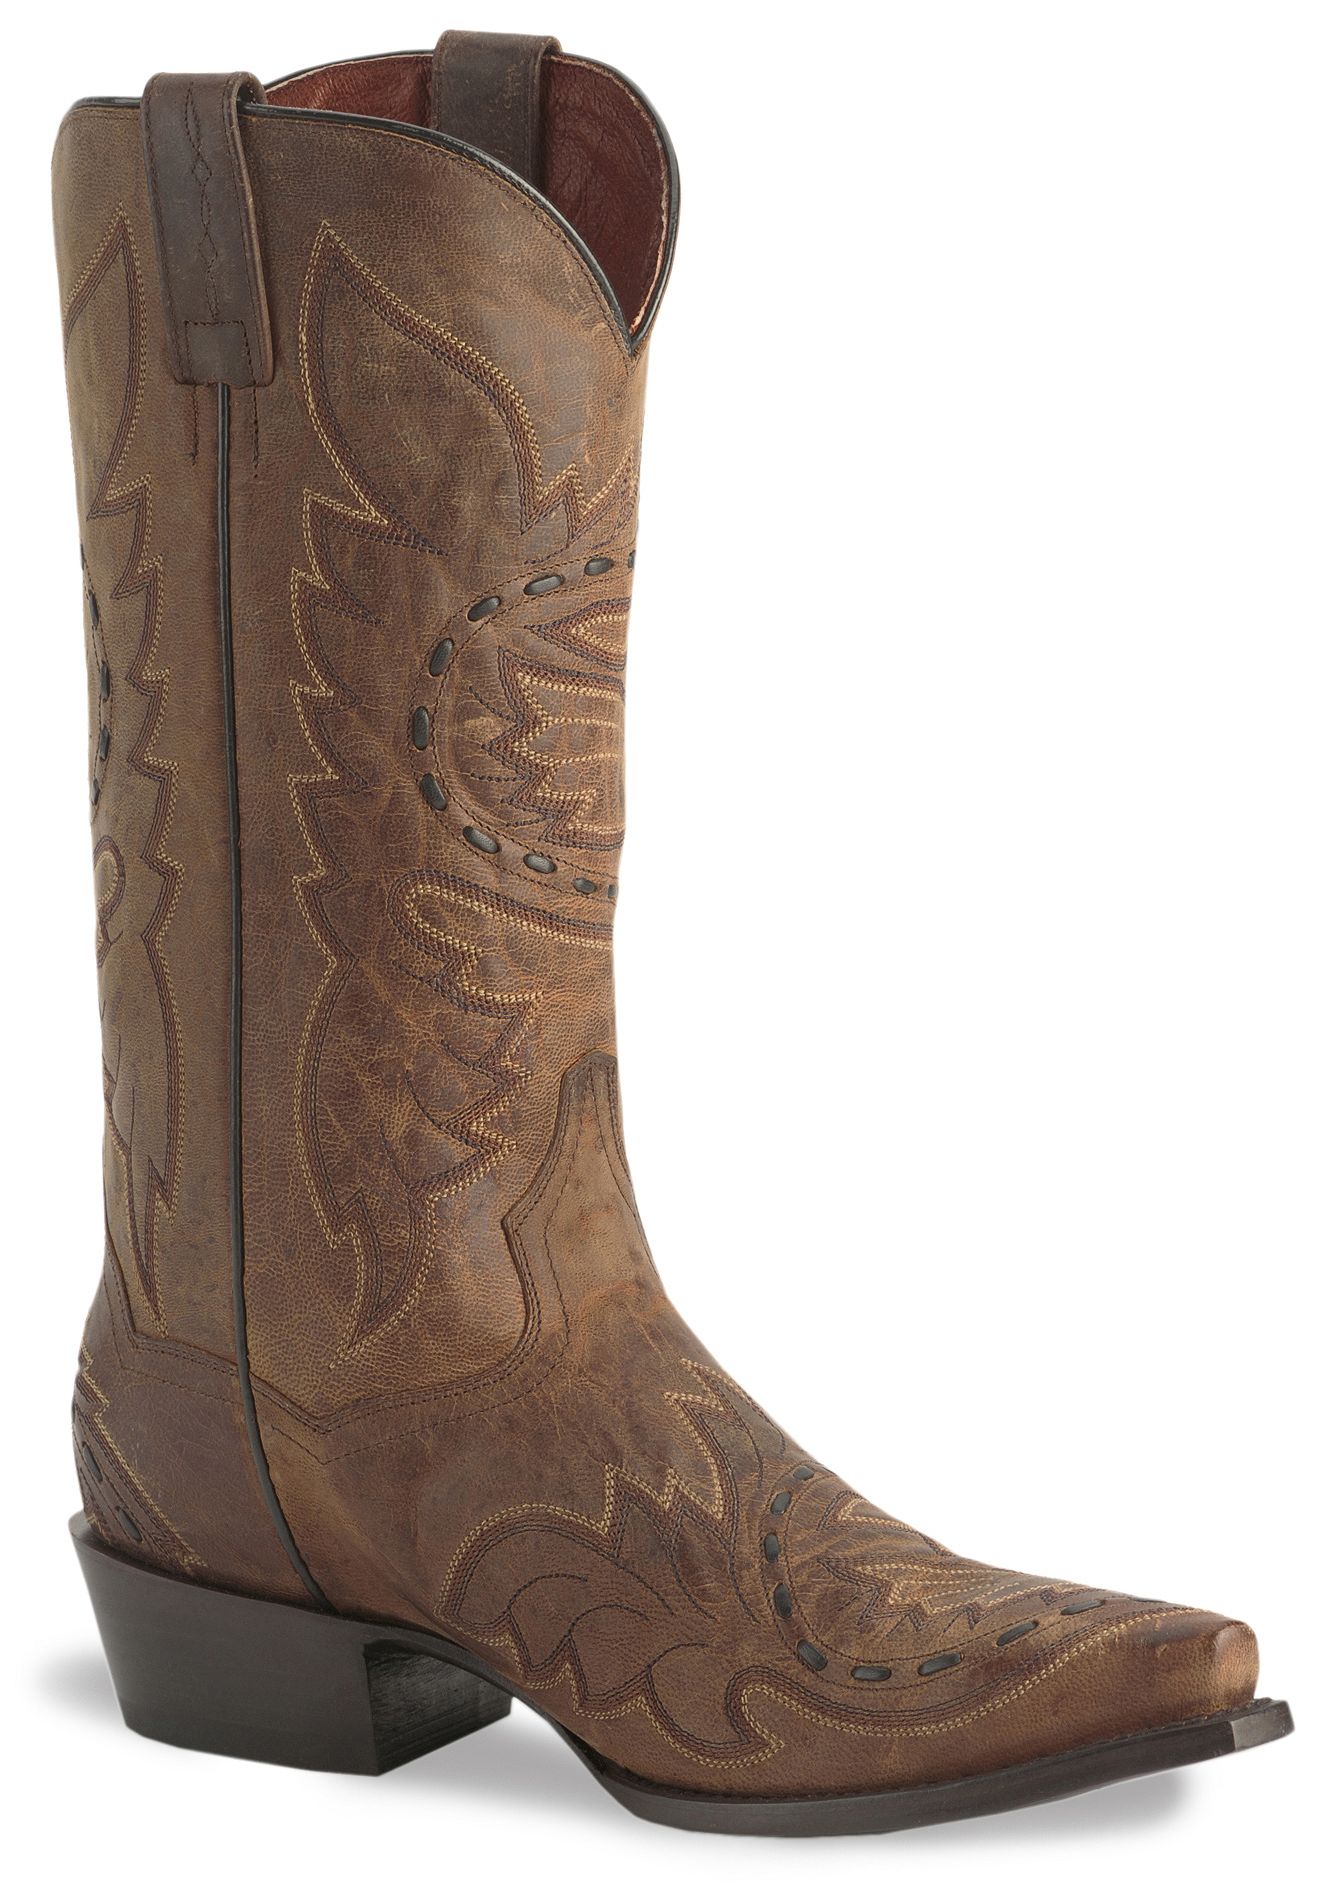 Dan Post Side Winder Distressed Cowboy Boots - Country Outfitter